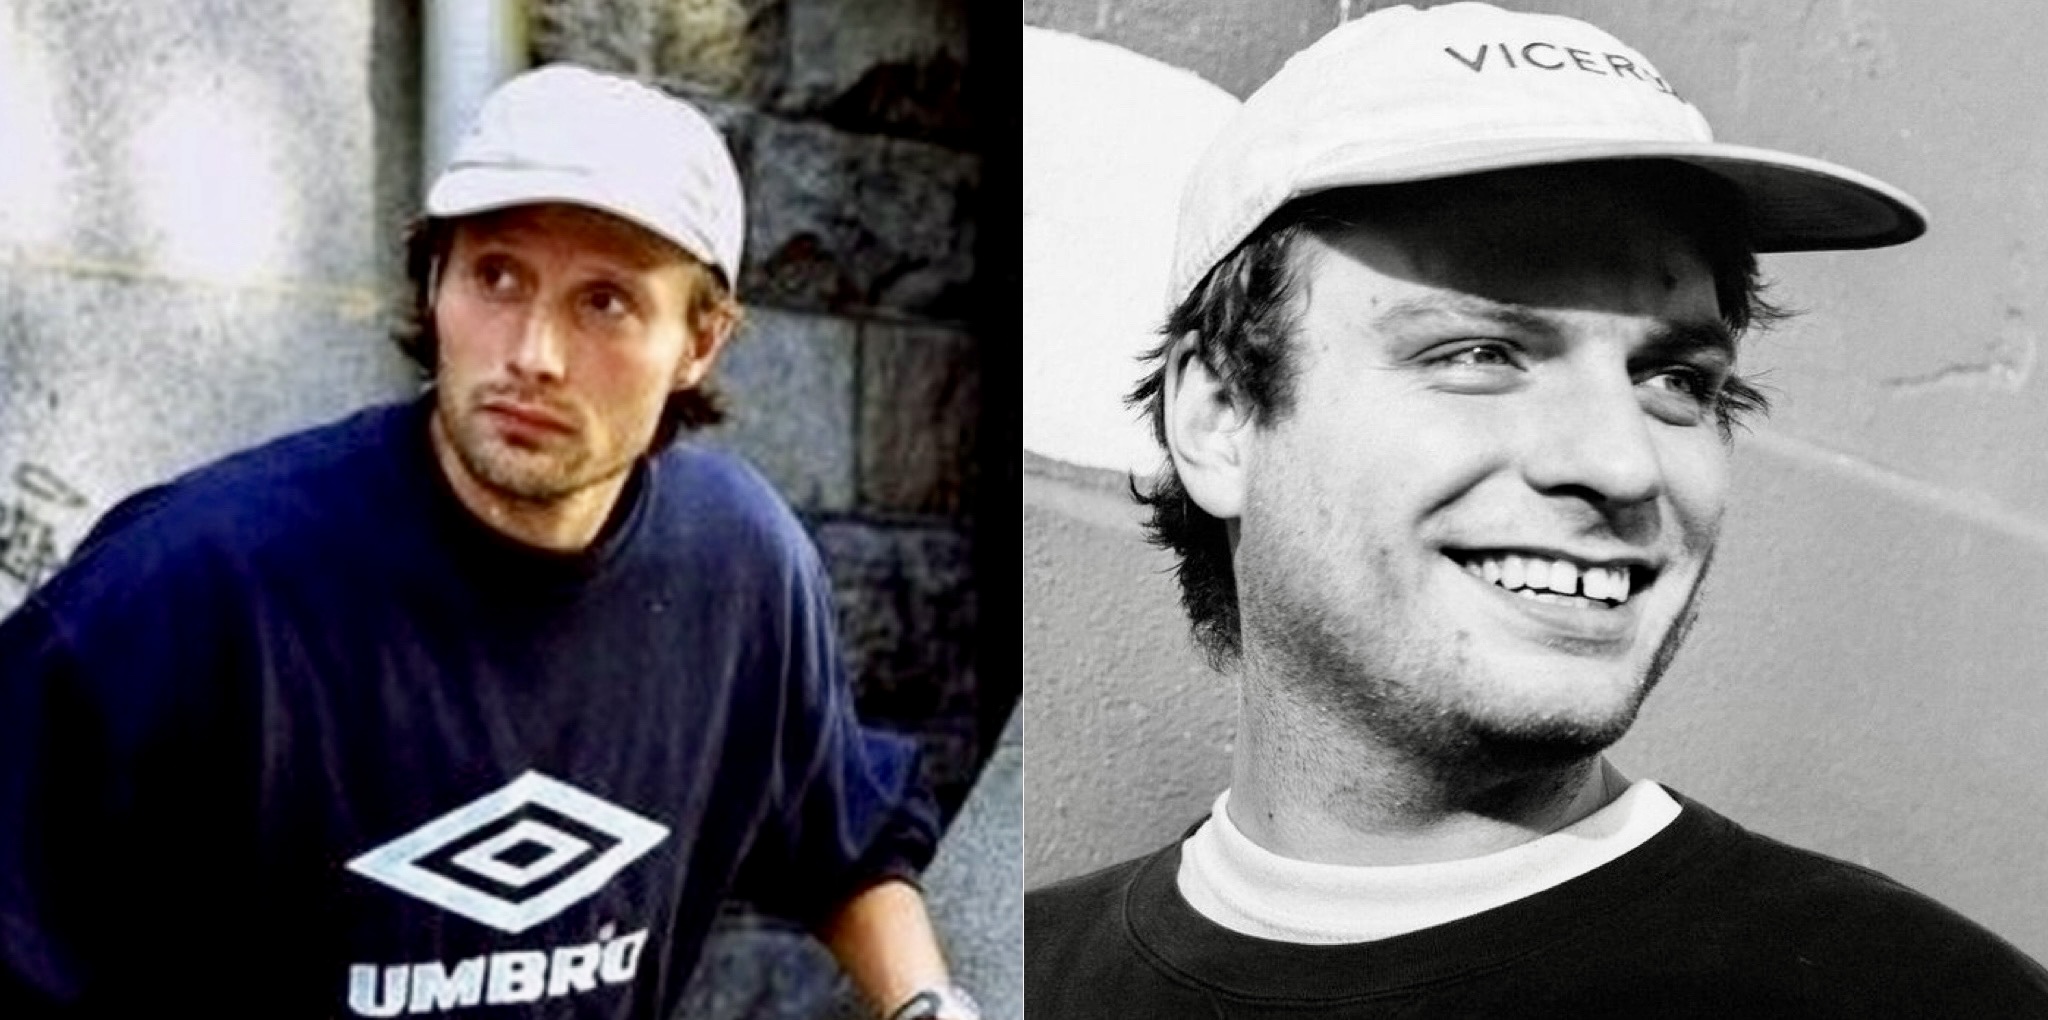 An old photo of Mads Mikkelsen has sparked comparisons to Mac DeMarco